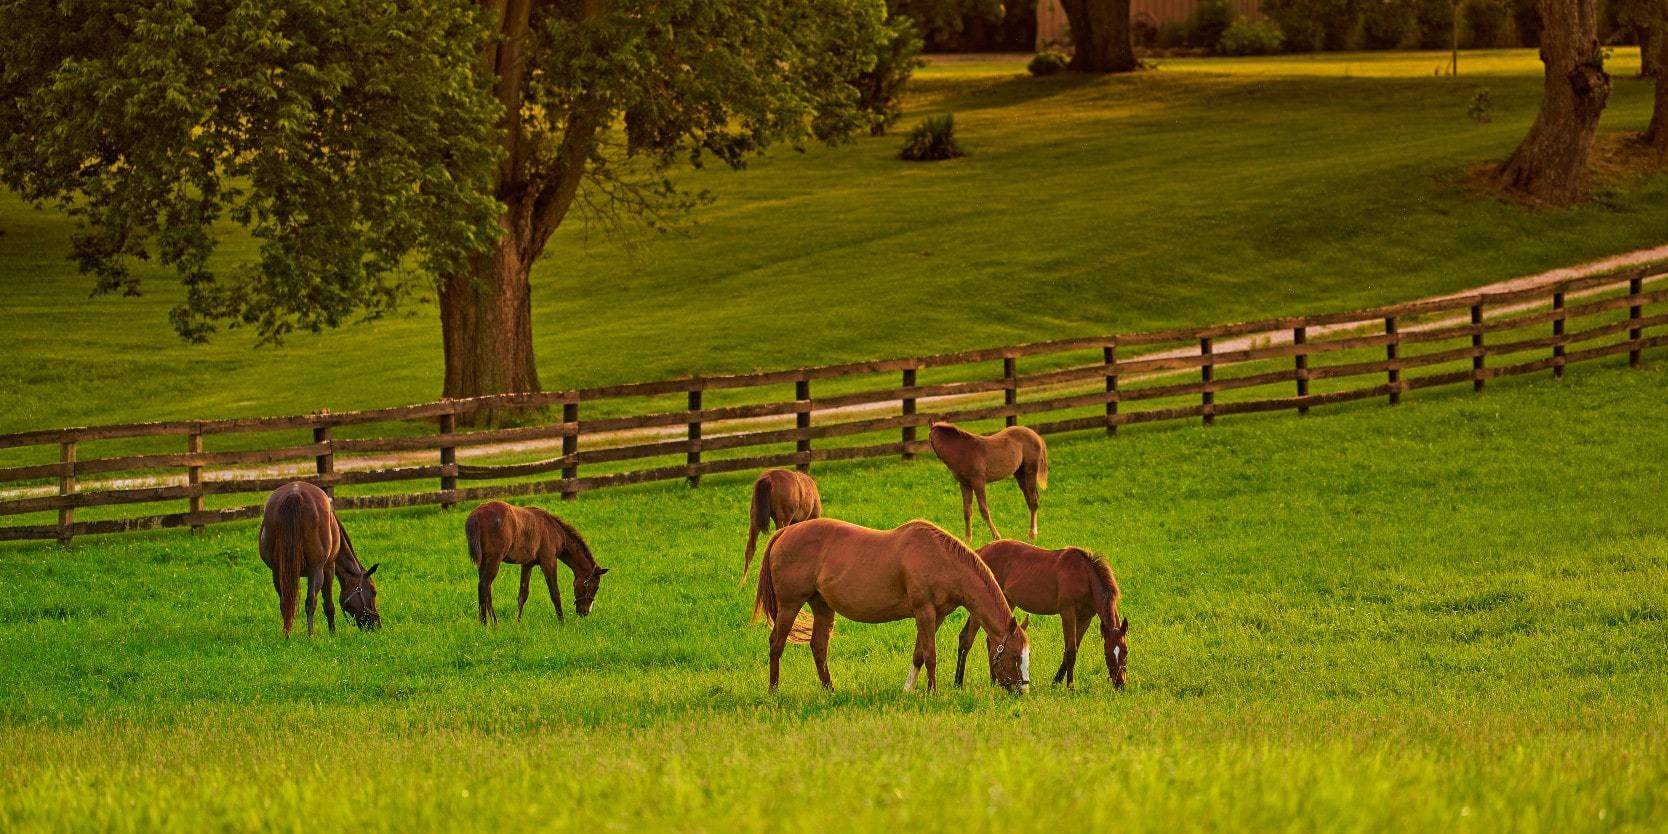 Horses grazing in a pasture on a horse farm in Paris, Kentucky